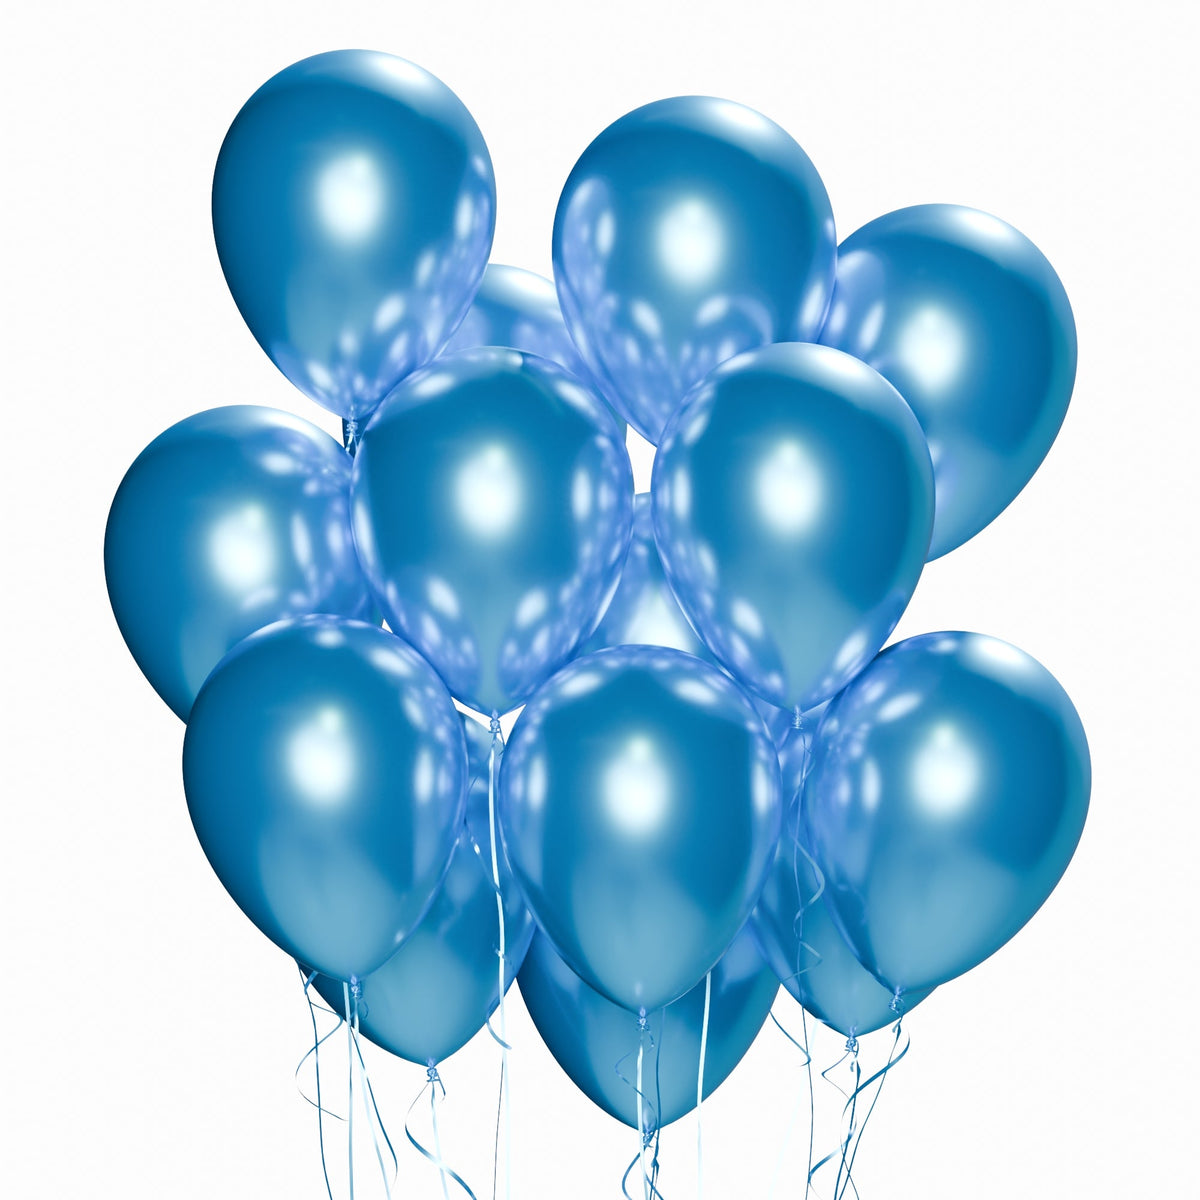 WIDE OCEAN INTERNATIONAL TRADE BEIJING CO., LTD Balloons Blue Latex Balloon 12 Inches, Chrome Collection, 72 Count 810064198700